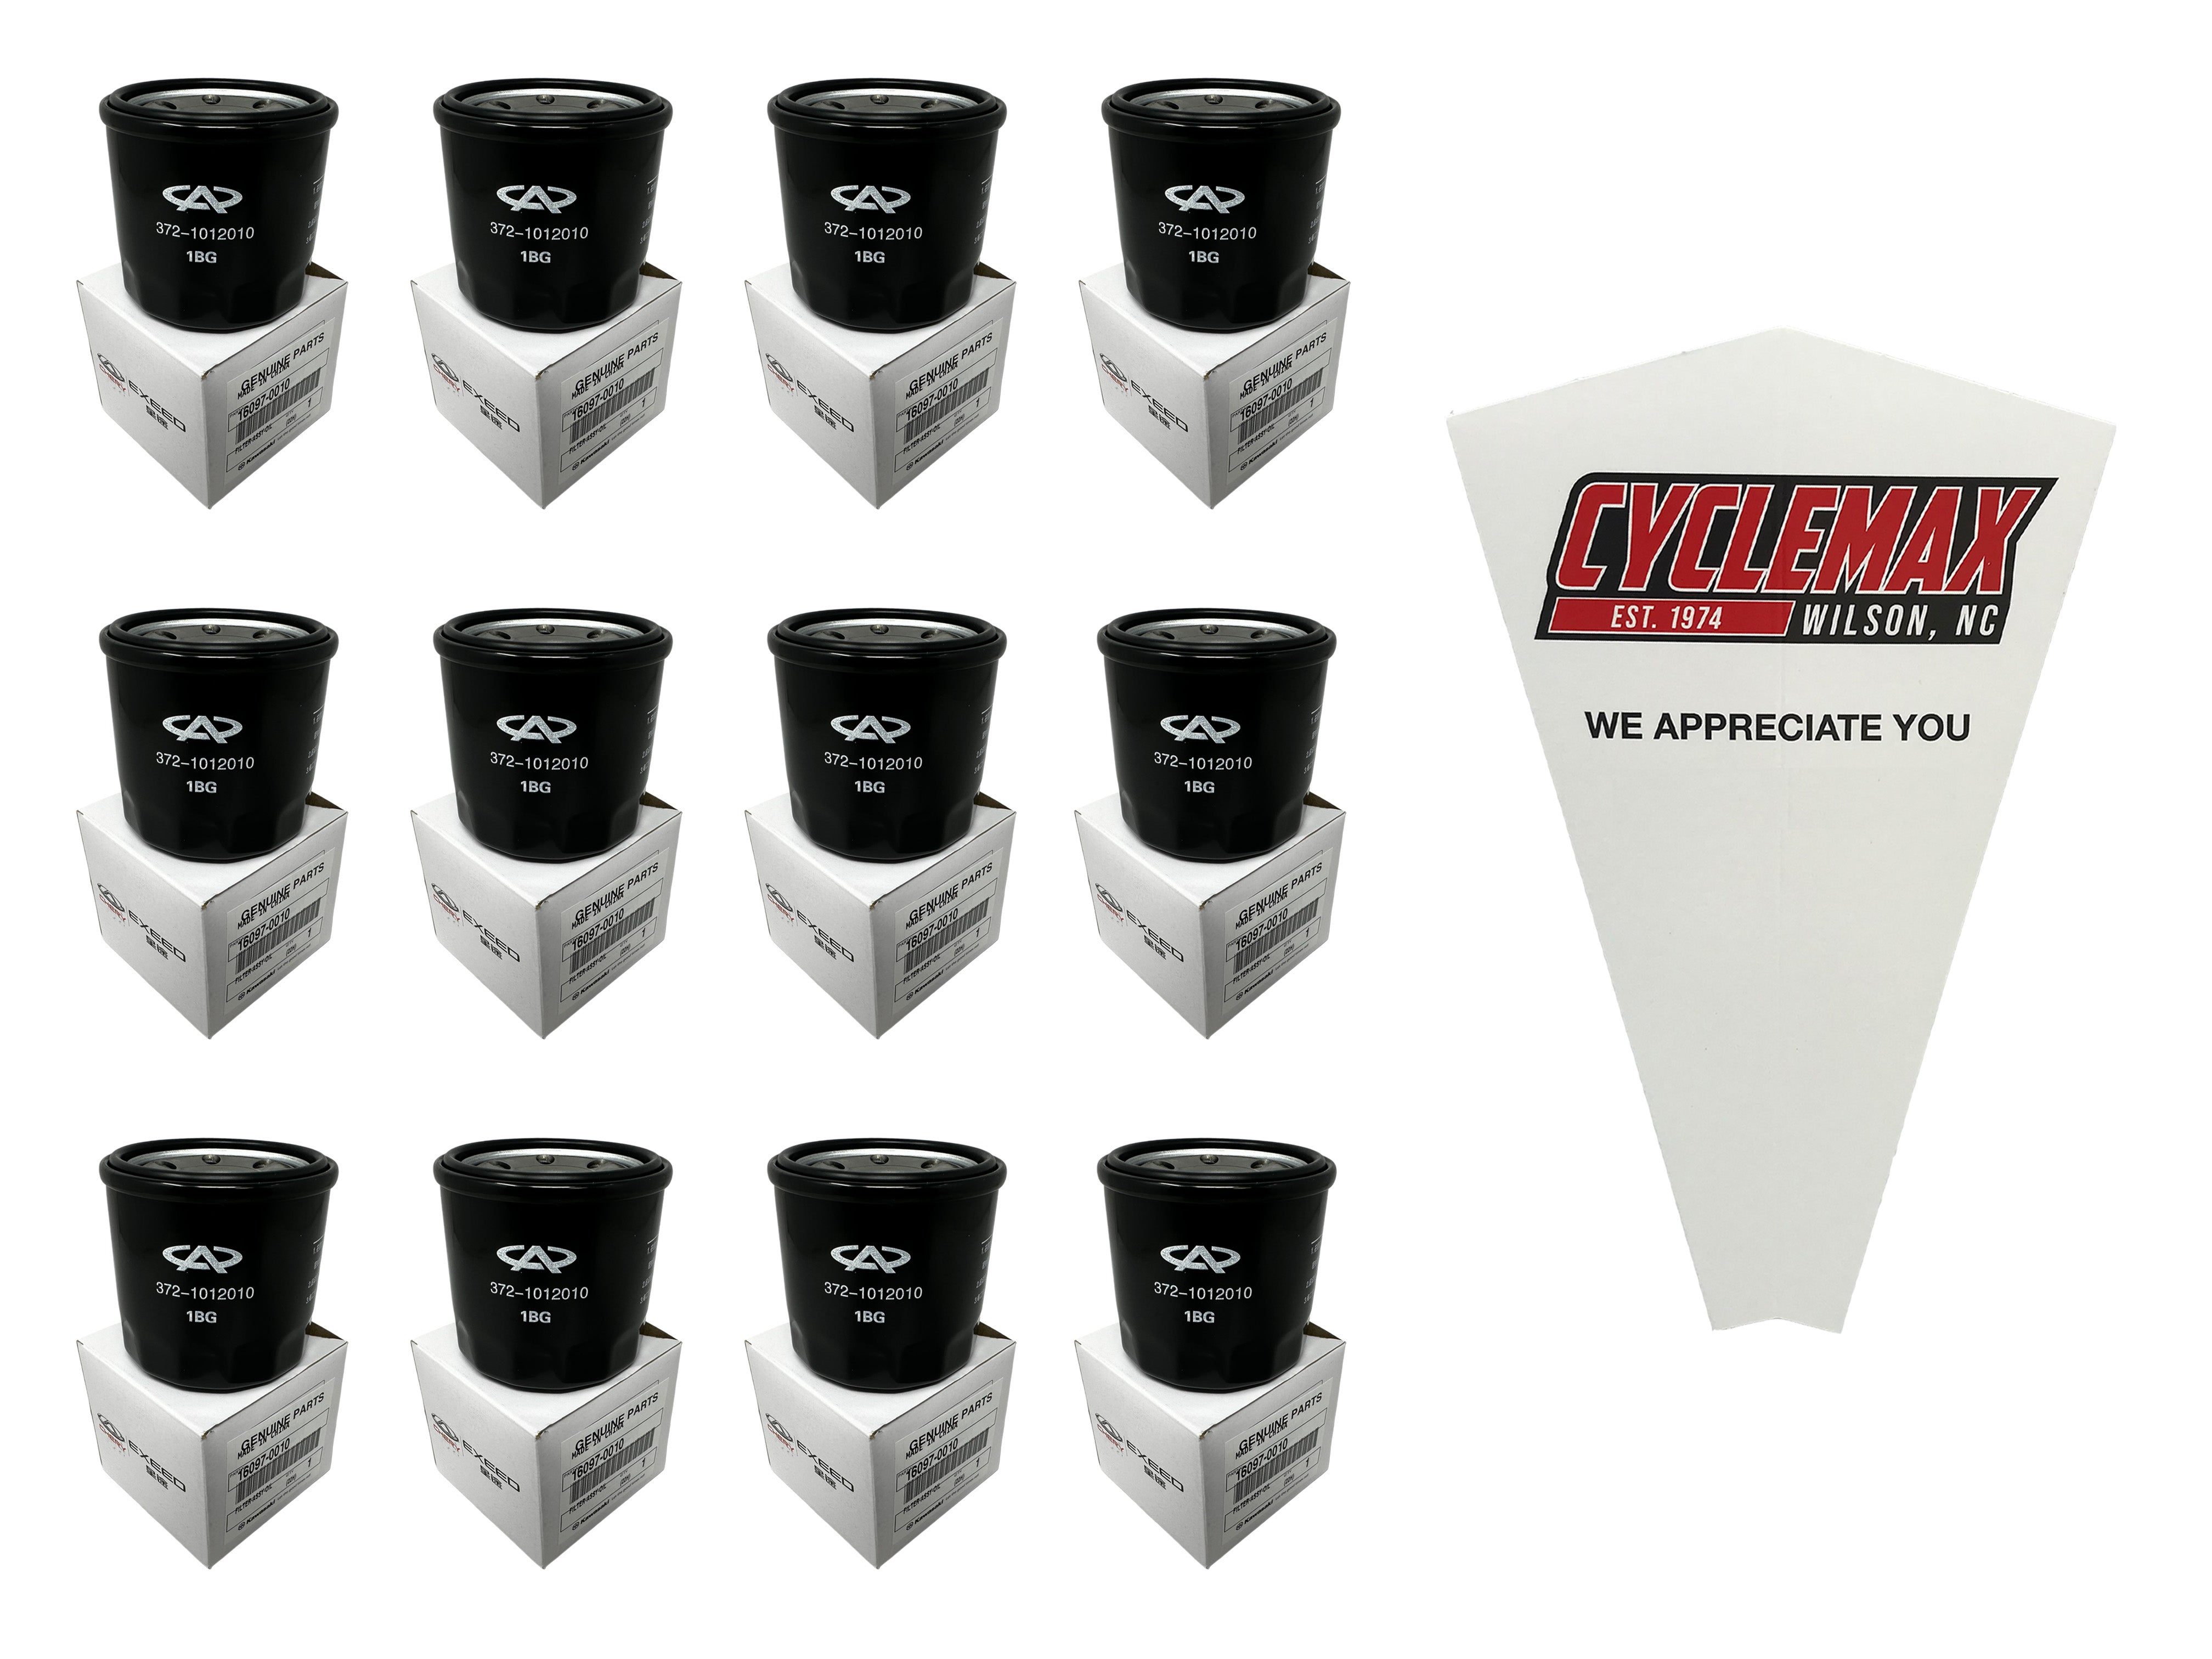 Cyclemax Twelve Pack for Kawasaki Oil Filter 16097-0010 Contains Twelve Filters and a Funnel